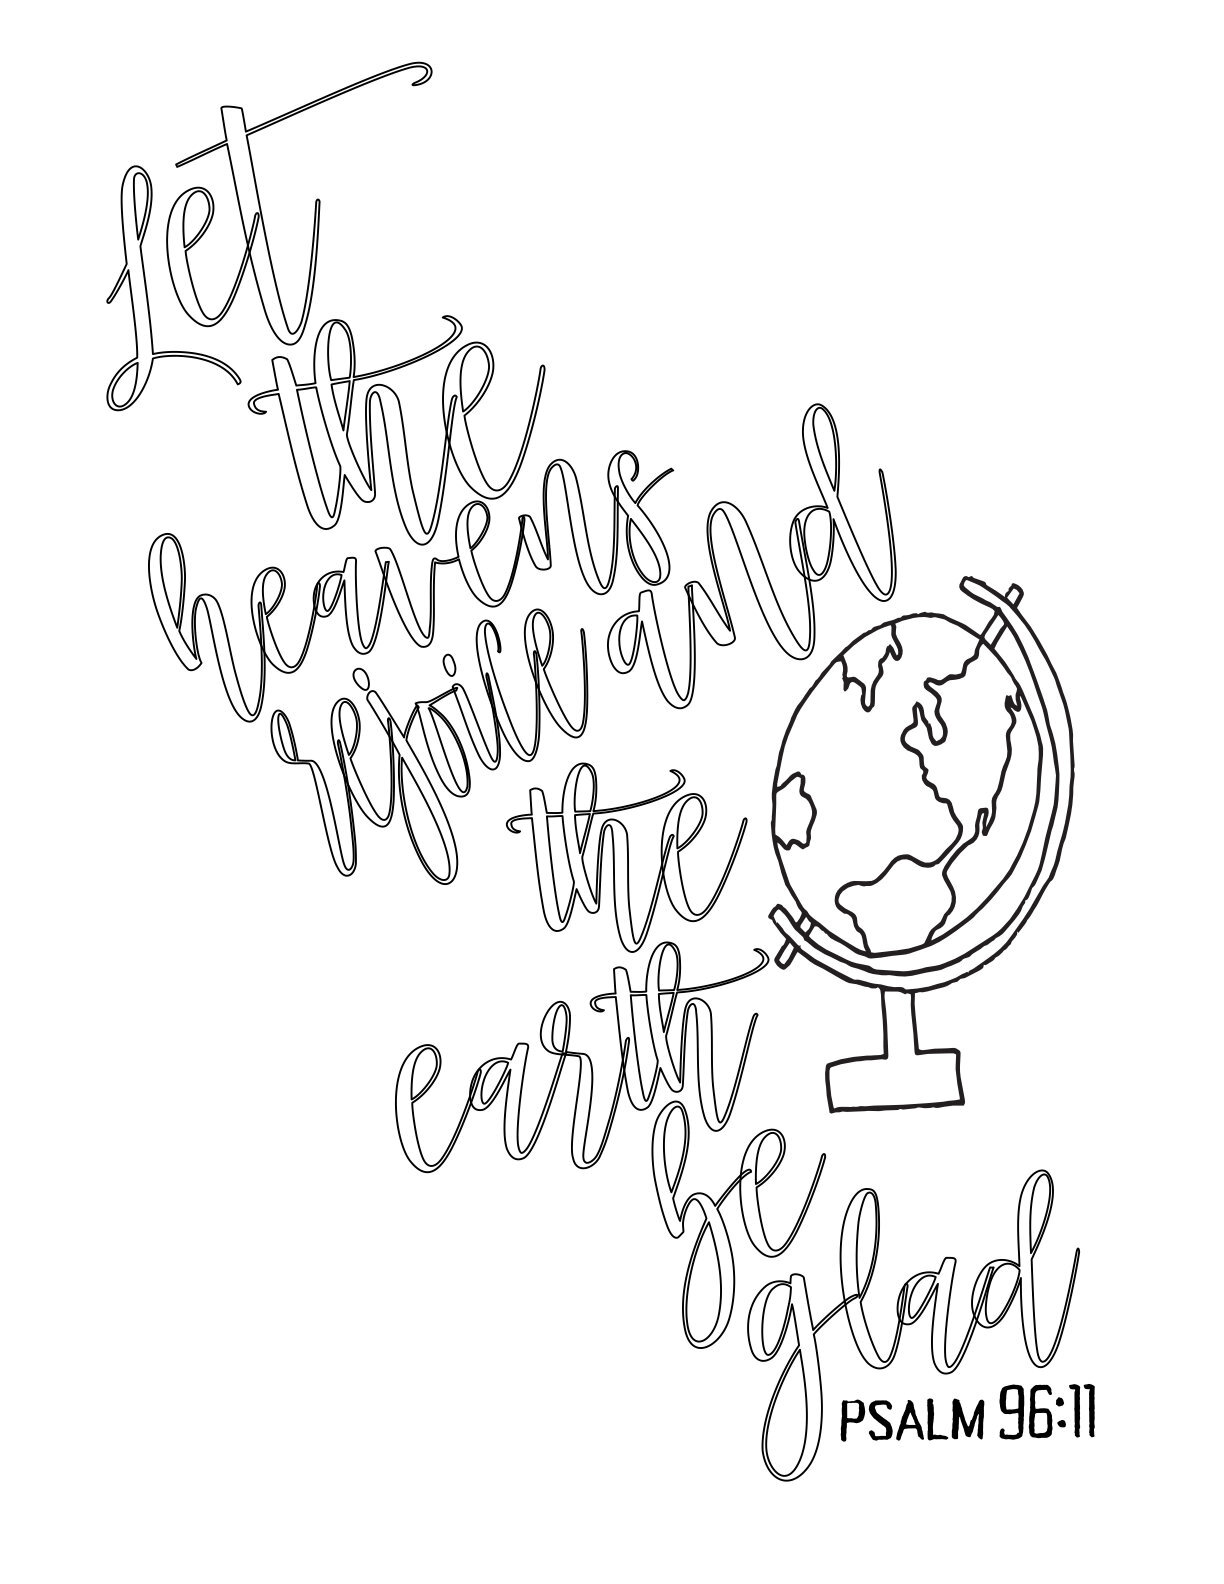 colorable text- Let The Heavens Rejoice And The Earth Be Glad - Pslam 96 - Free Christmas Printable CLICK HERE TO DOWNLOAD YOUR FREE HEAVENS REJOICE PRINTABLE CHRISTMAS PAGE